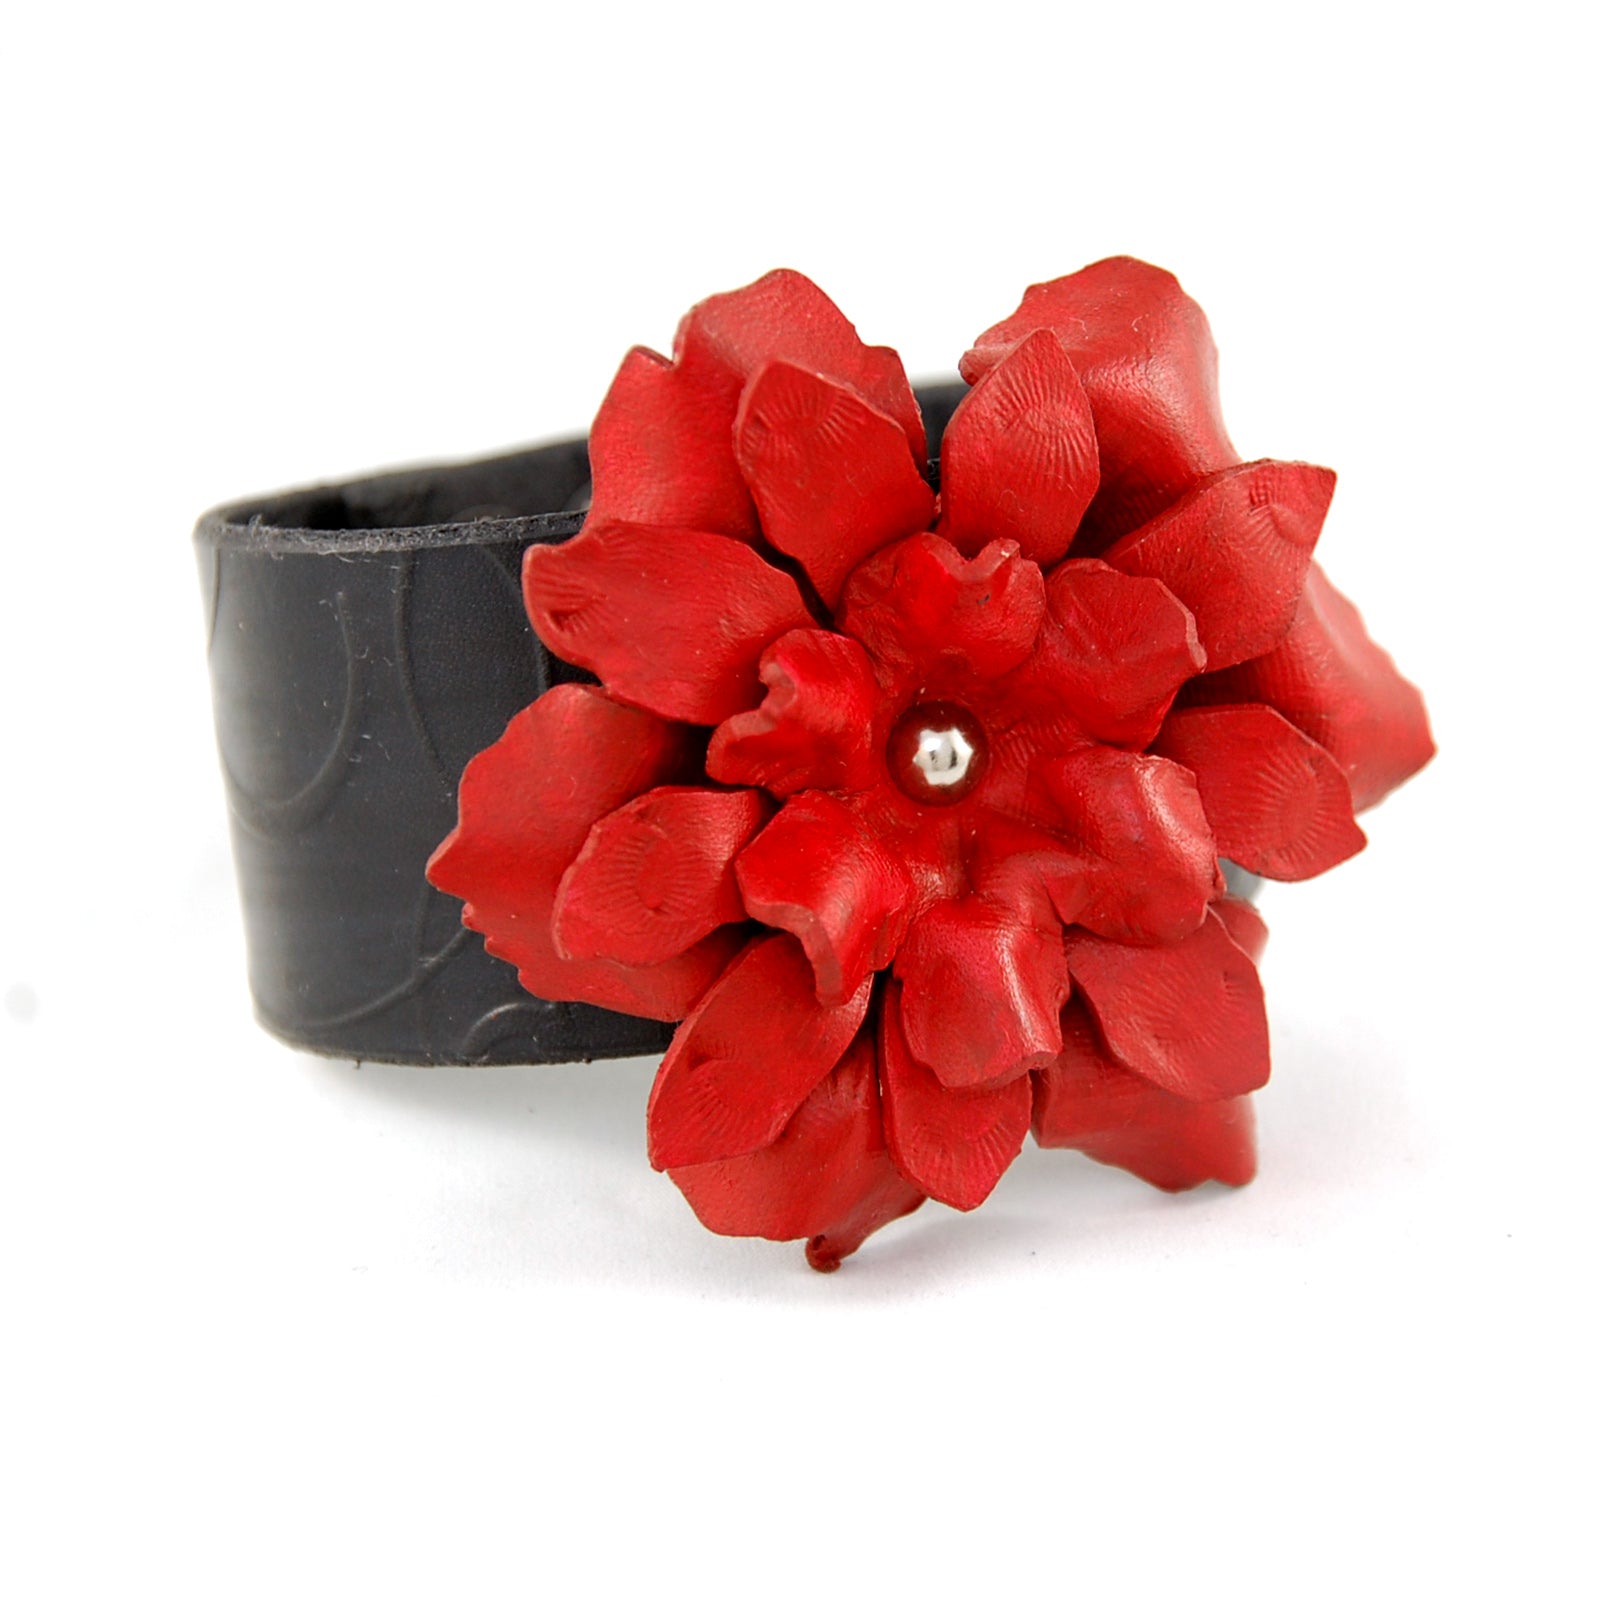 FL1 - 1 1/2" Leather cuff with hand crafted Leather Flower - Fearless hART